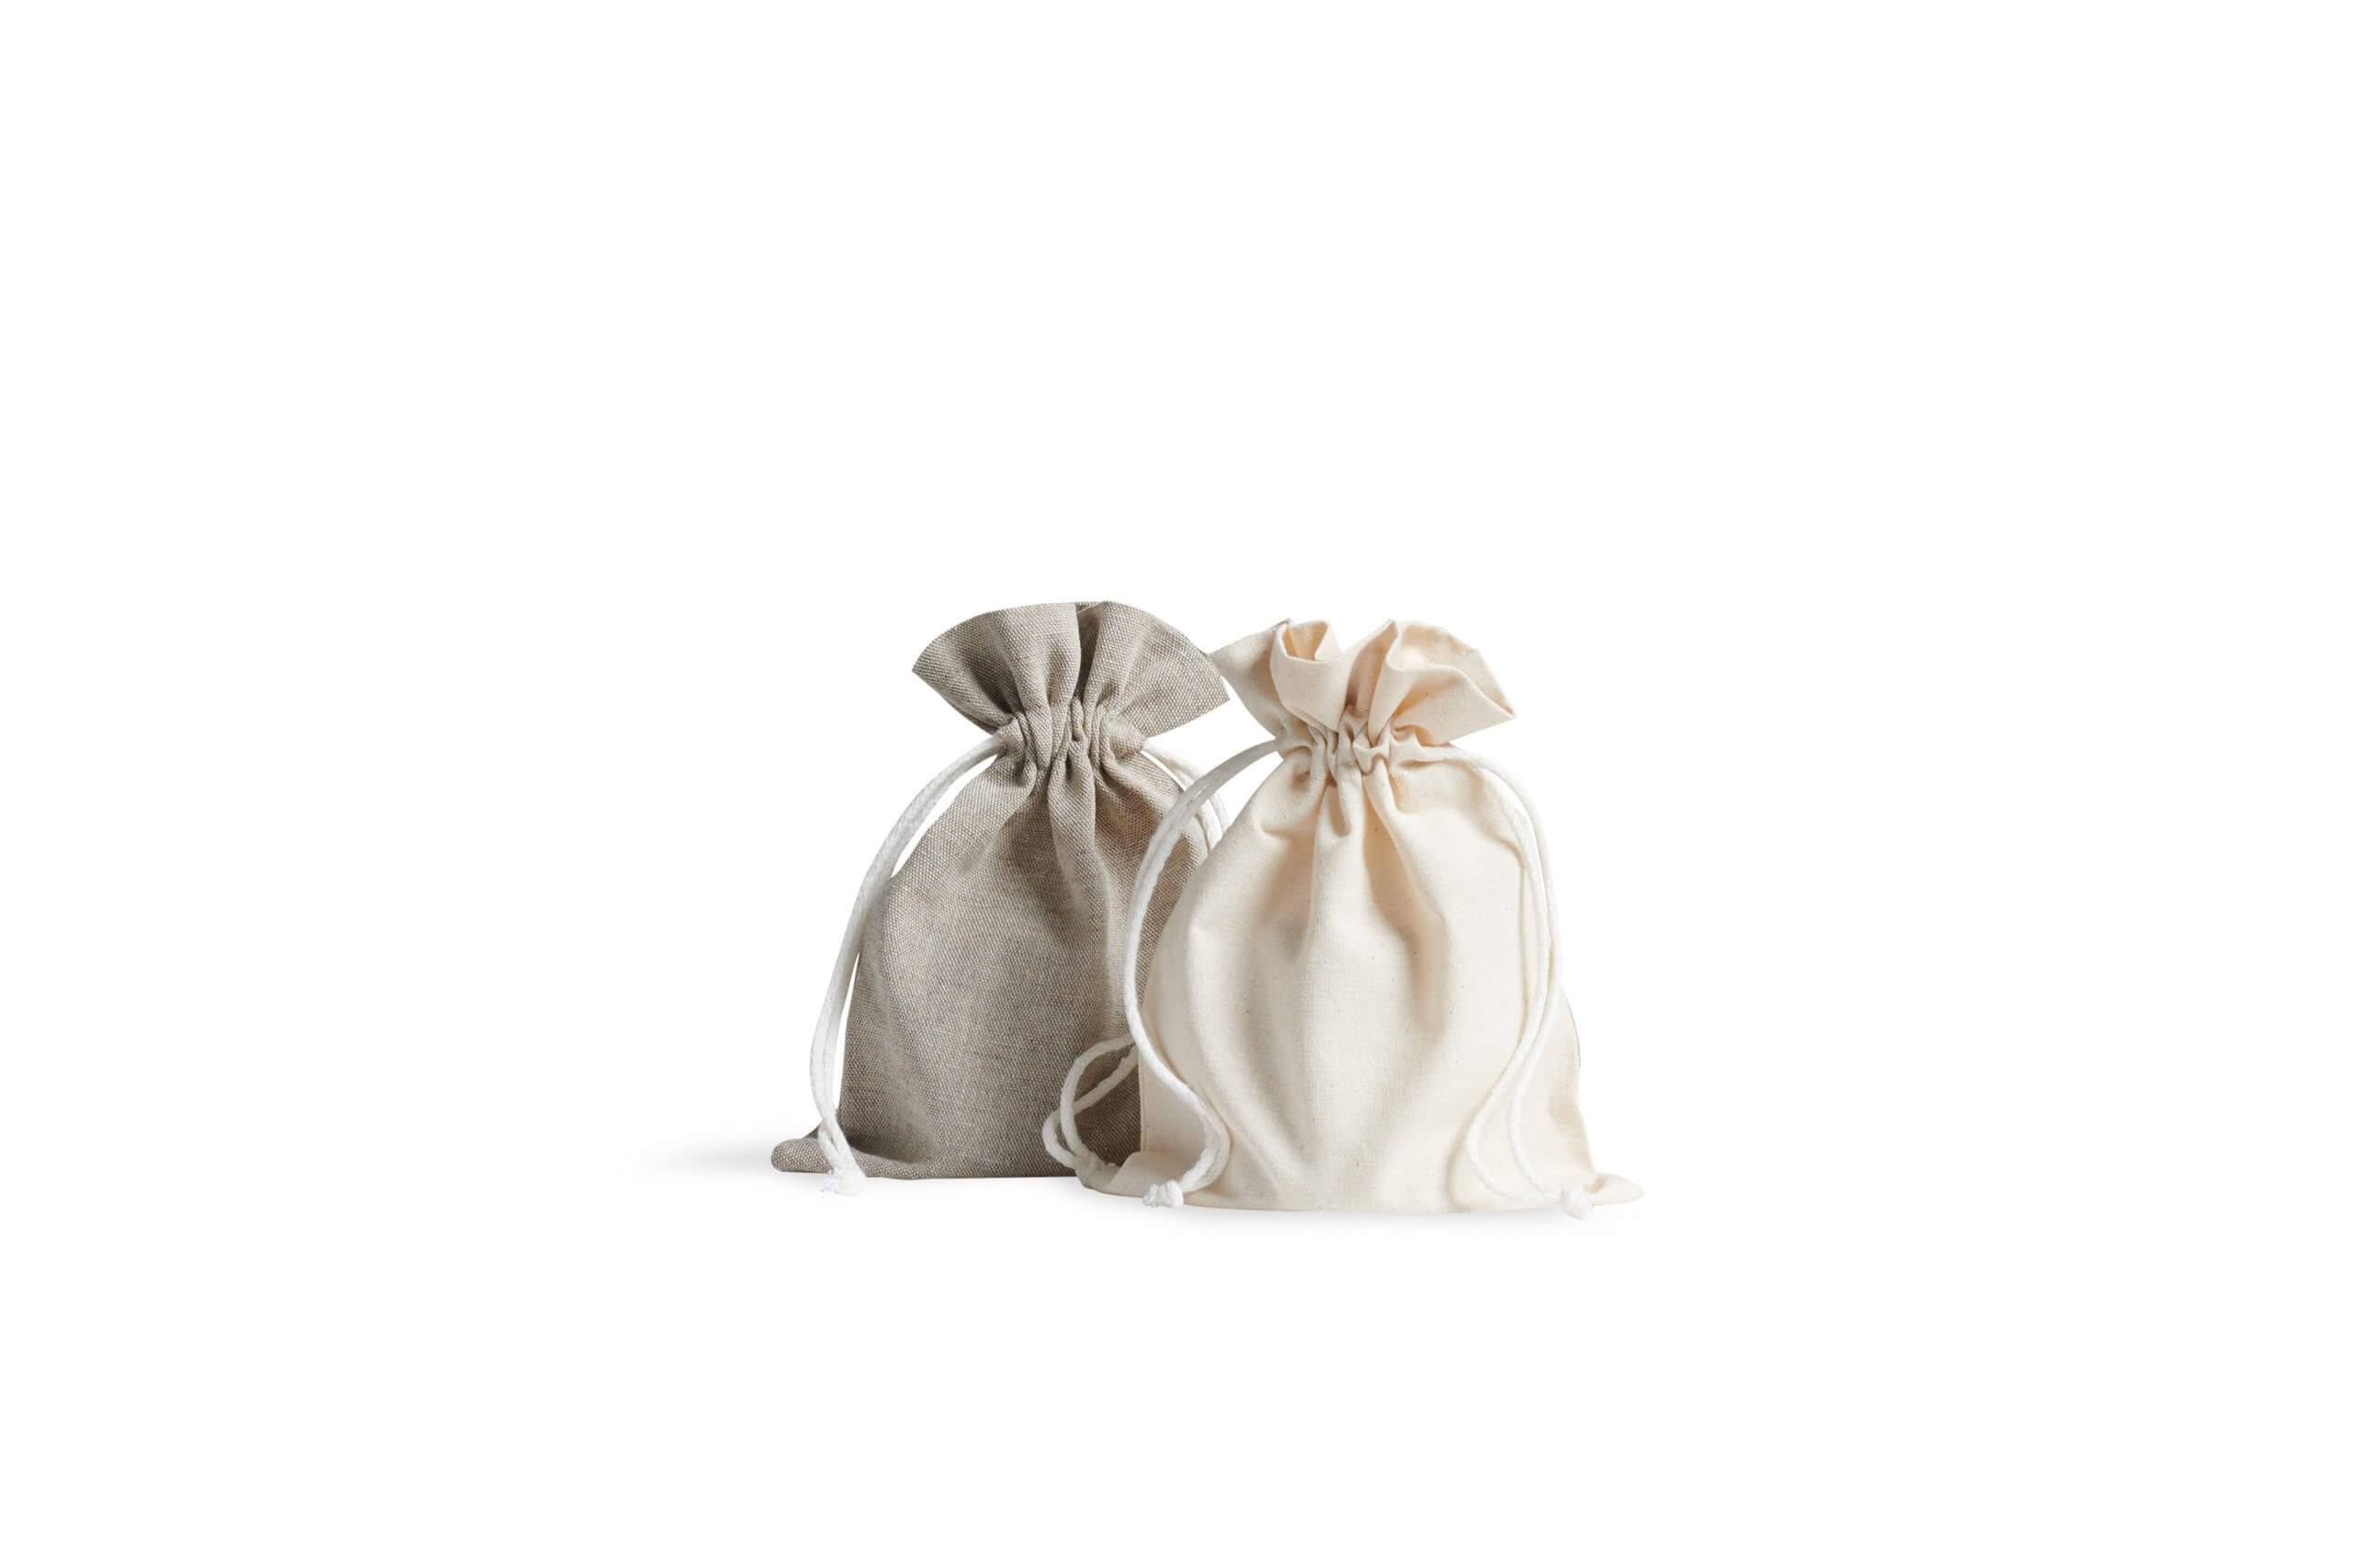 Choose size 12 PCS Natural White Muslin Favor Bags with Cotton Drawstring 